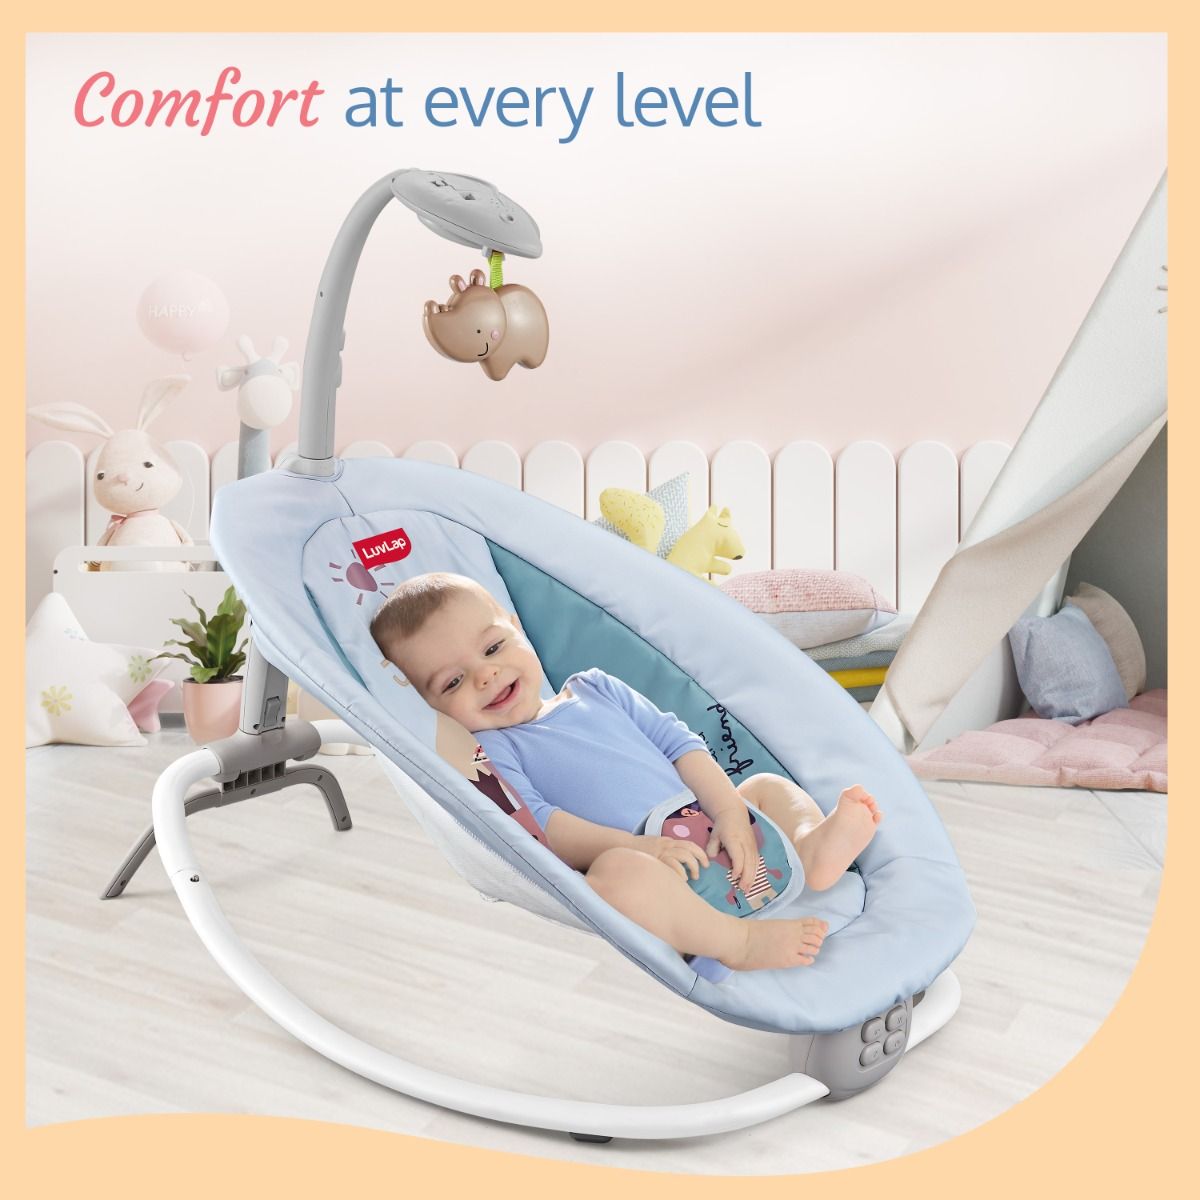  BABY JOY Baby Bouncer for Infants, 2 in 1 Foldable